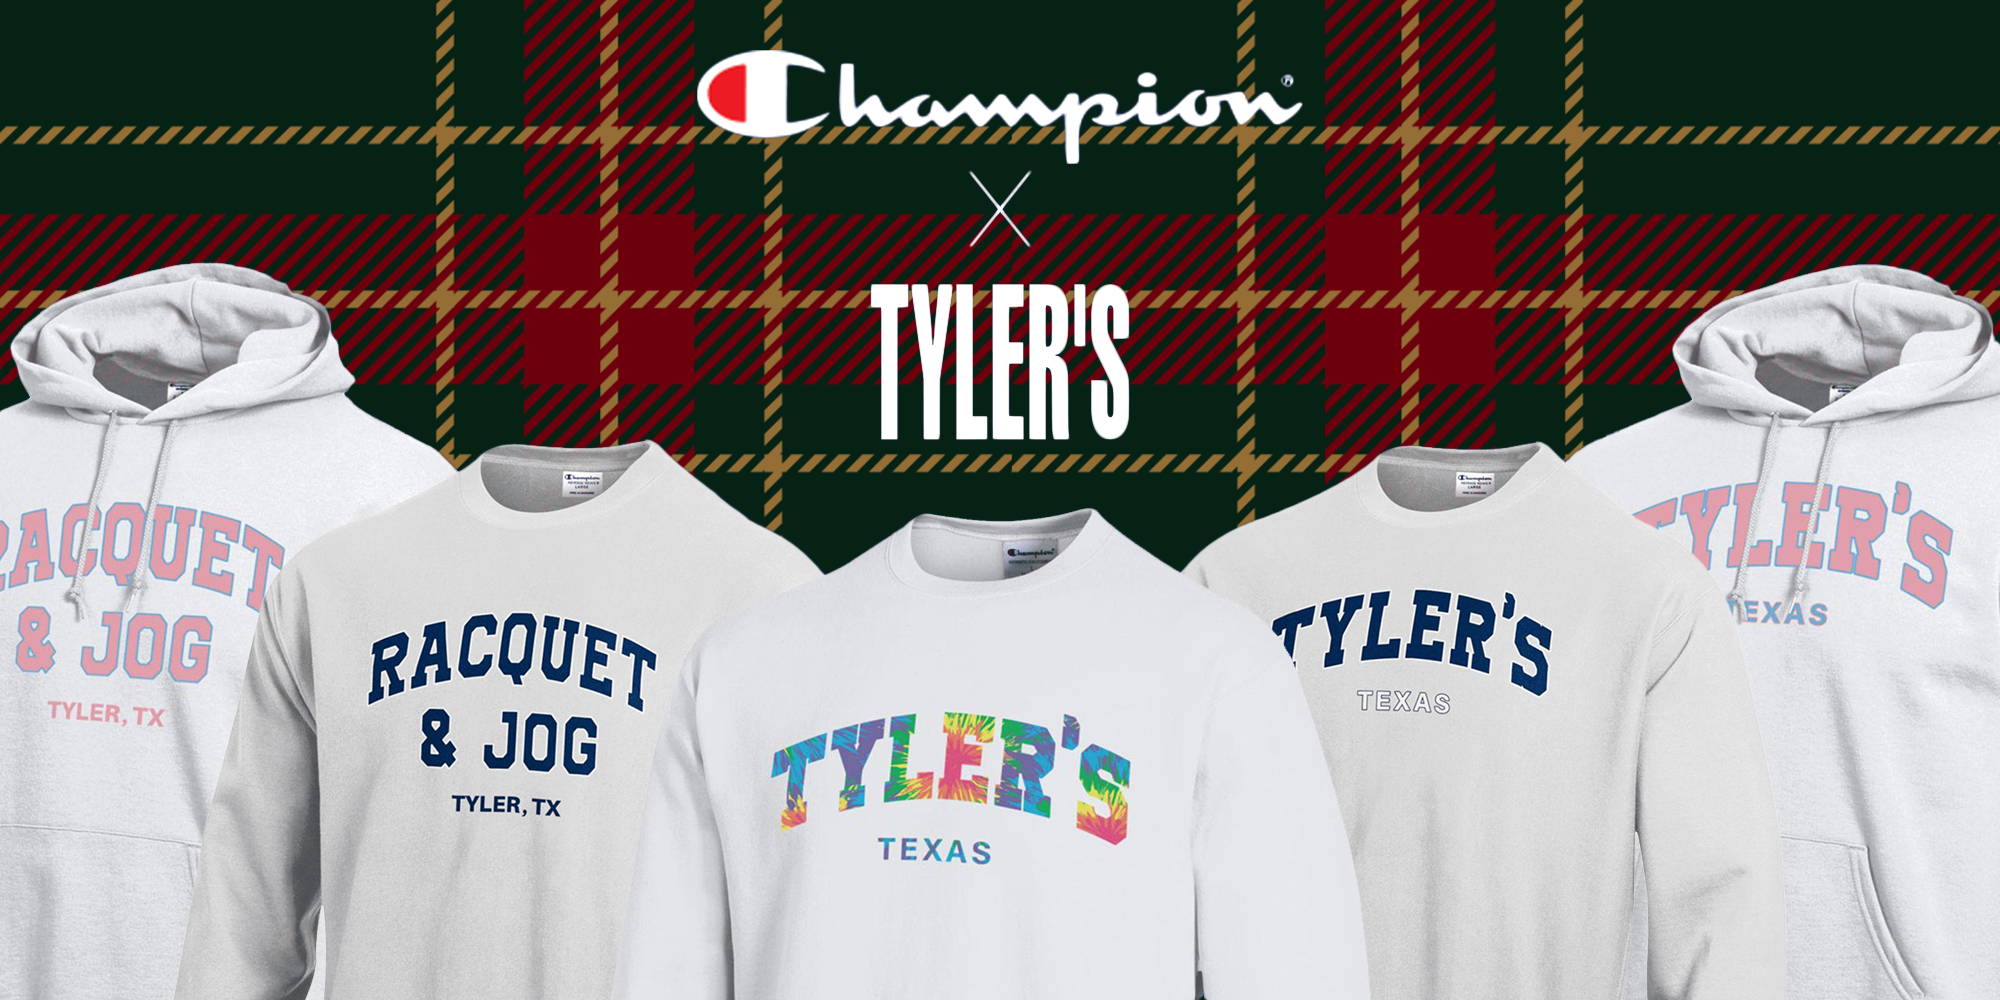 graphic of TYLER'S and Racquet and Jog Champion style sweatshirts and hoodies